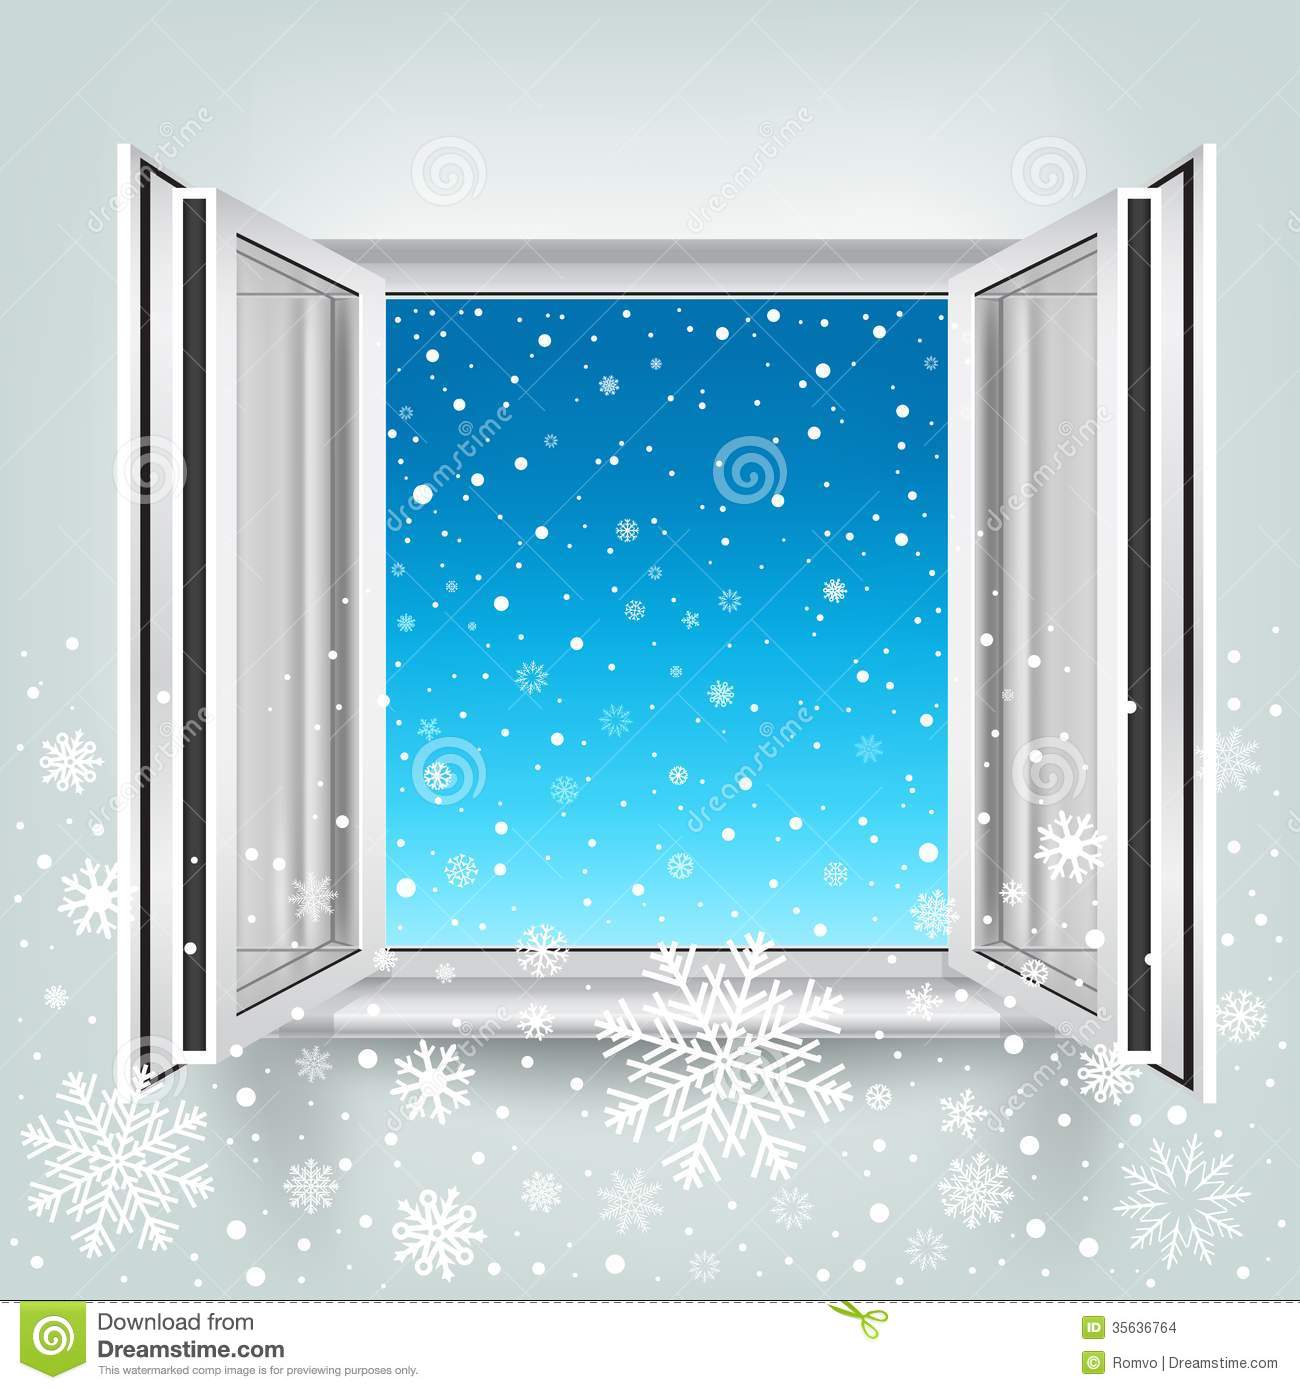 Open Window And Falling Snow Stock Images   Image  35636764